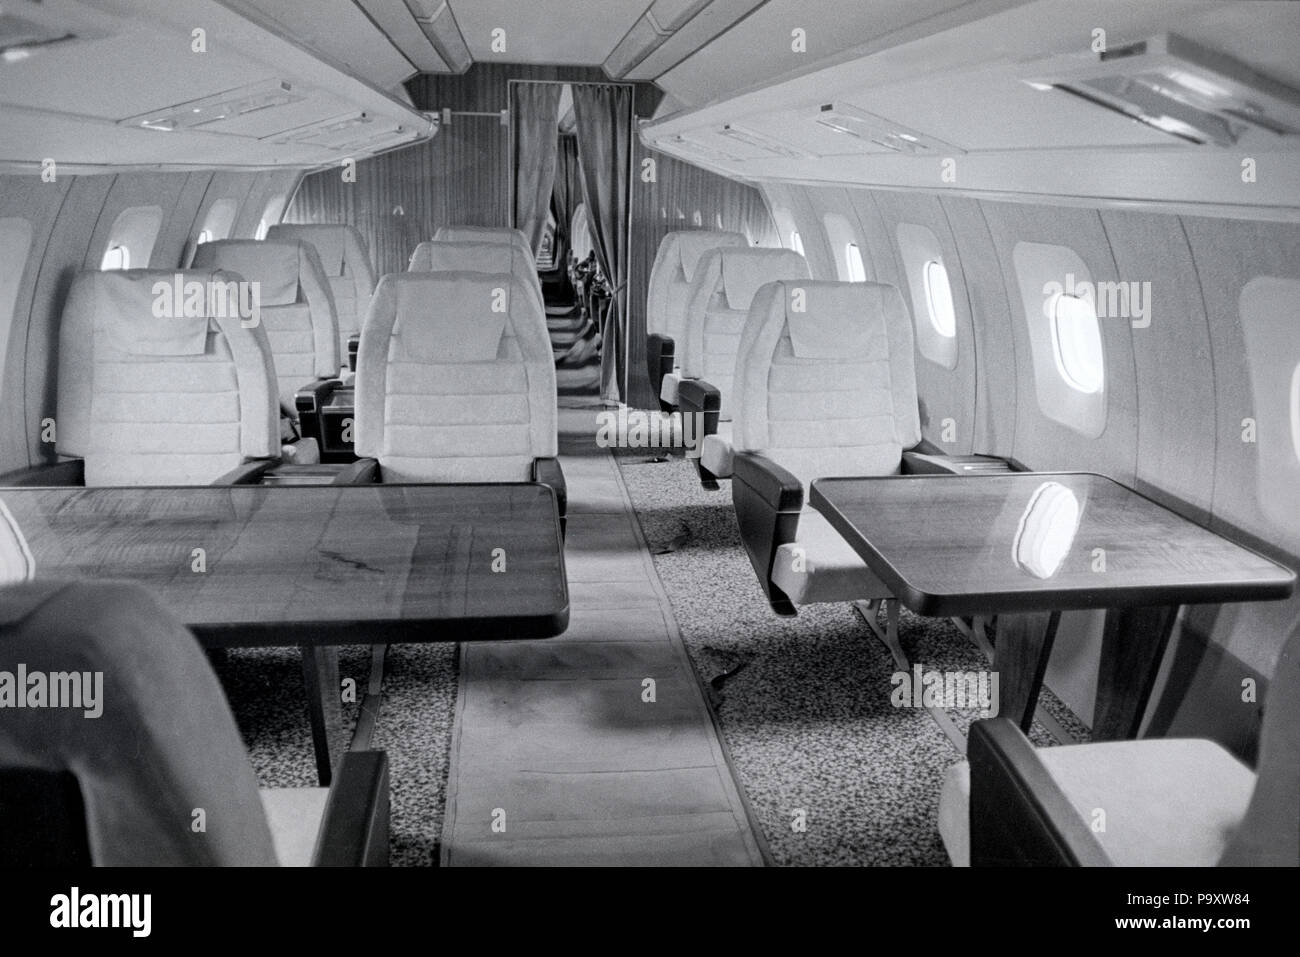 A first class cabin section of the Tupolev Tu-144 supersonic passenger jet  aircraft Stock Photo - Alamy